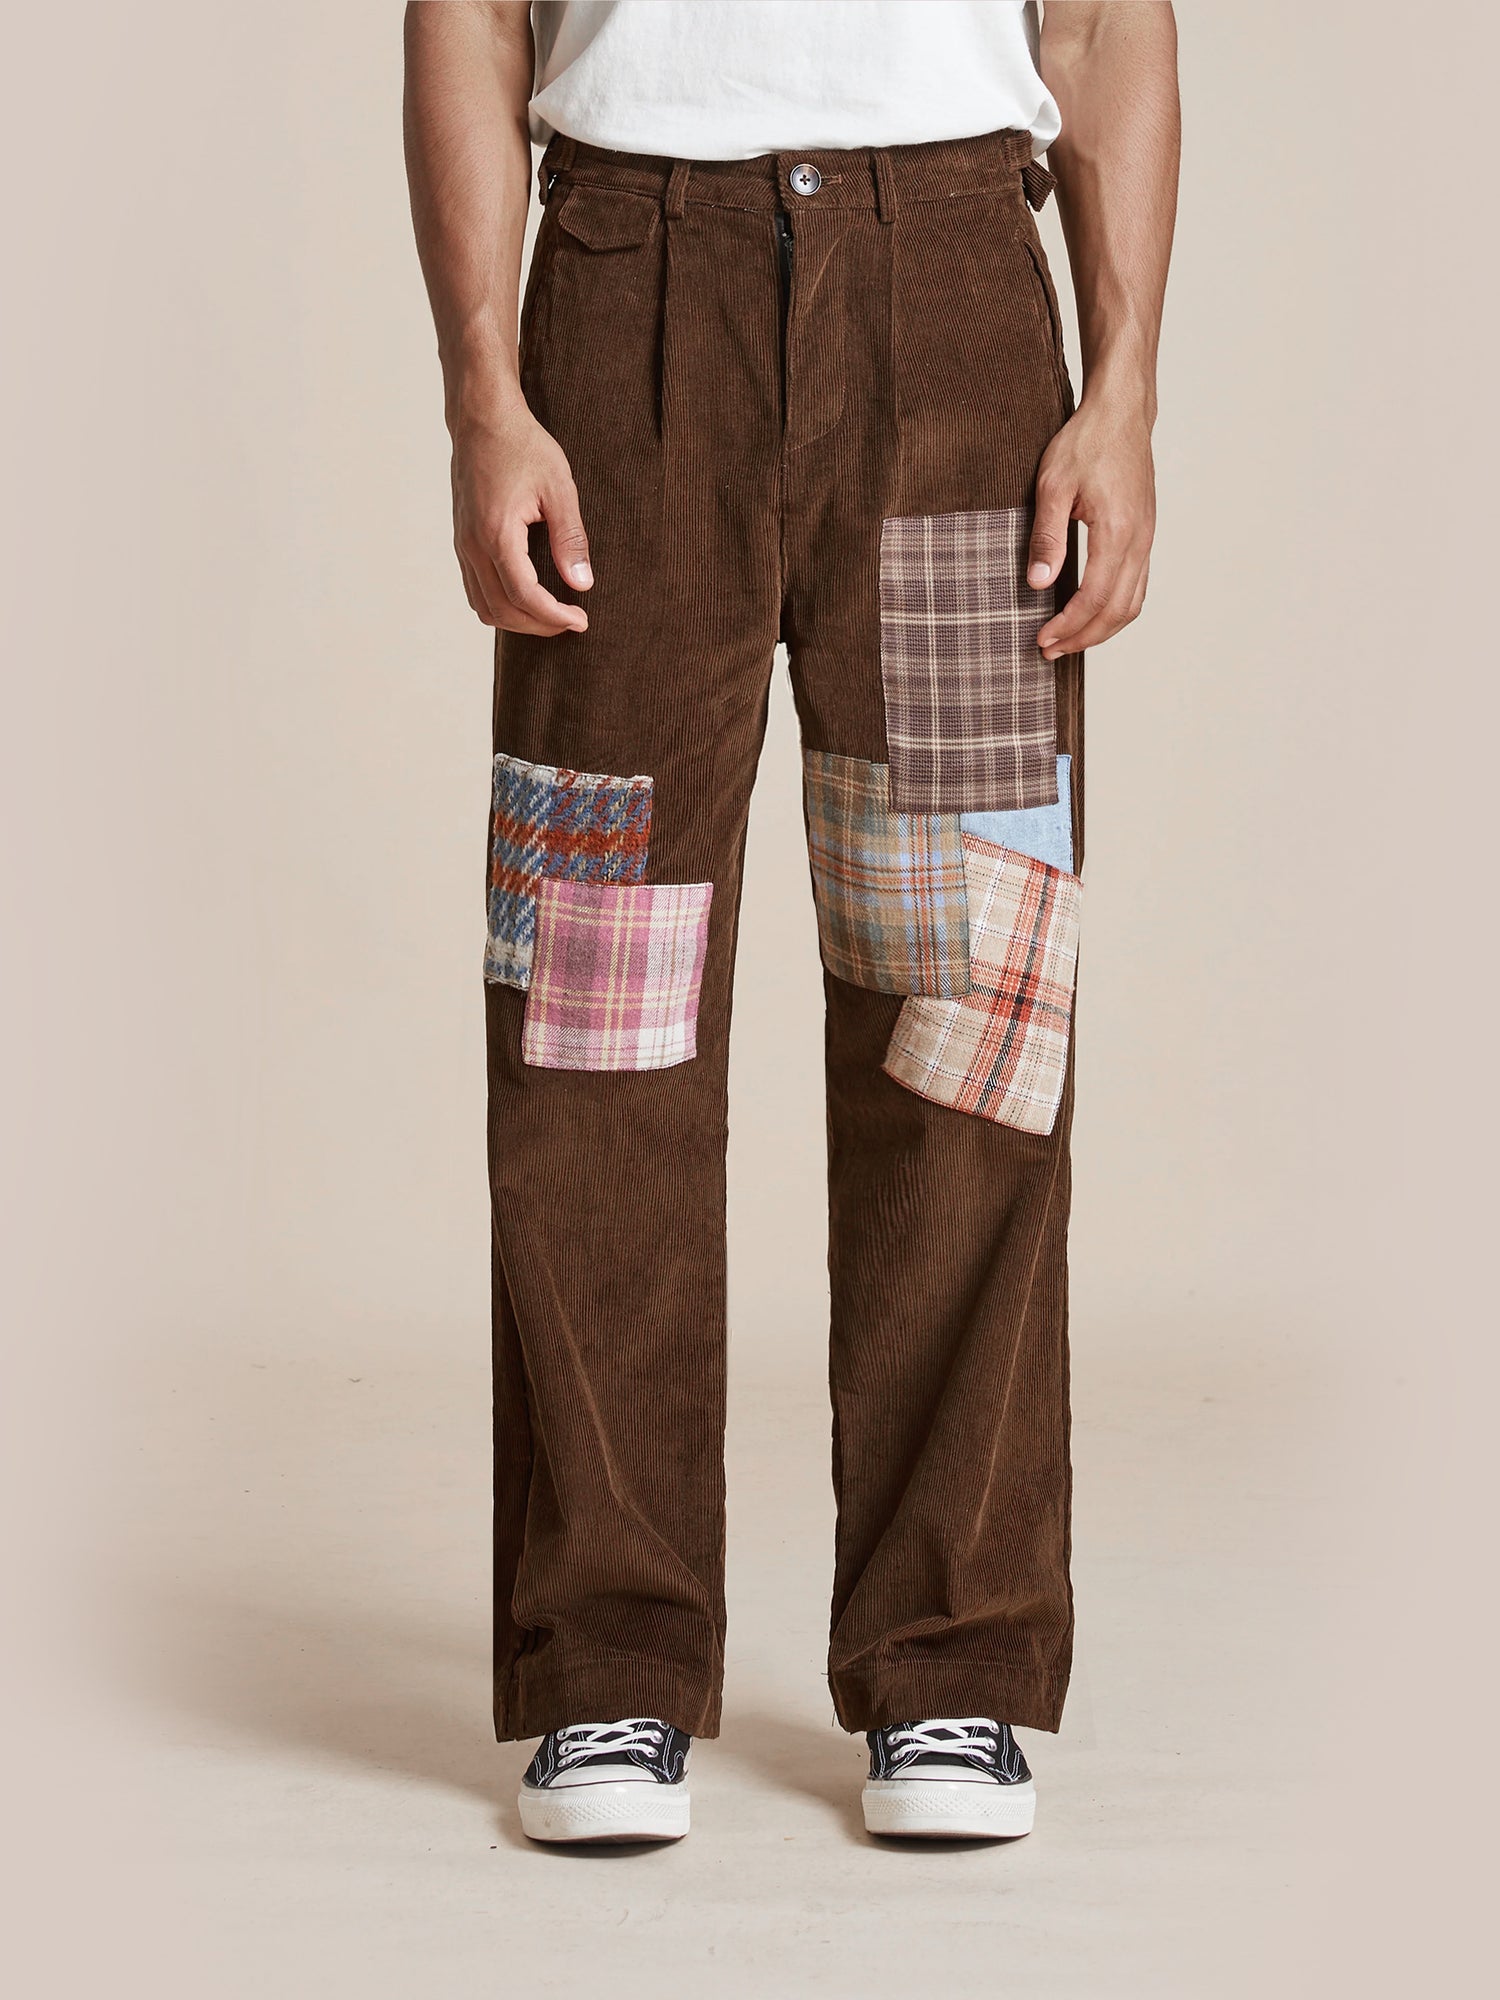 A person standing wearing Found Multi-Plaid Patch Corduroy Pants with multi-plaid patch detail on the thighs, paired with white and black sneakers.